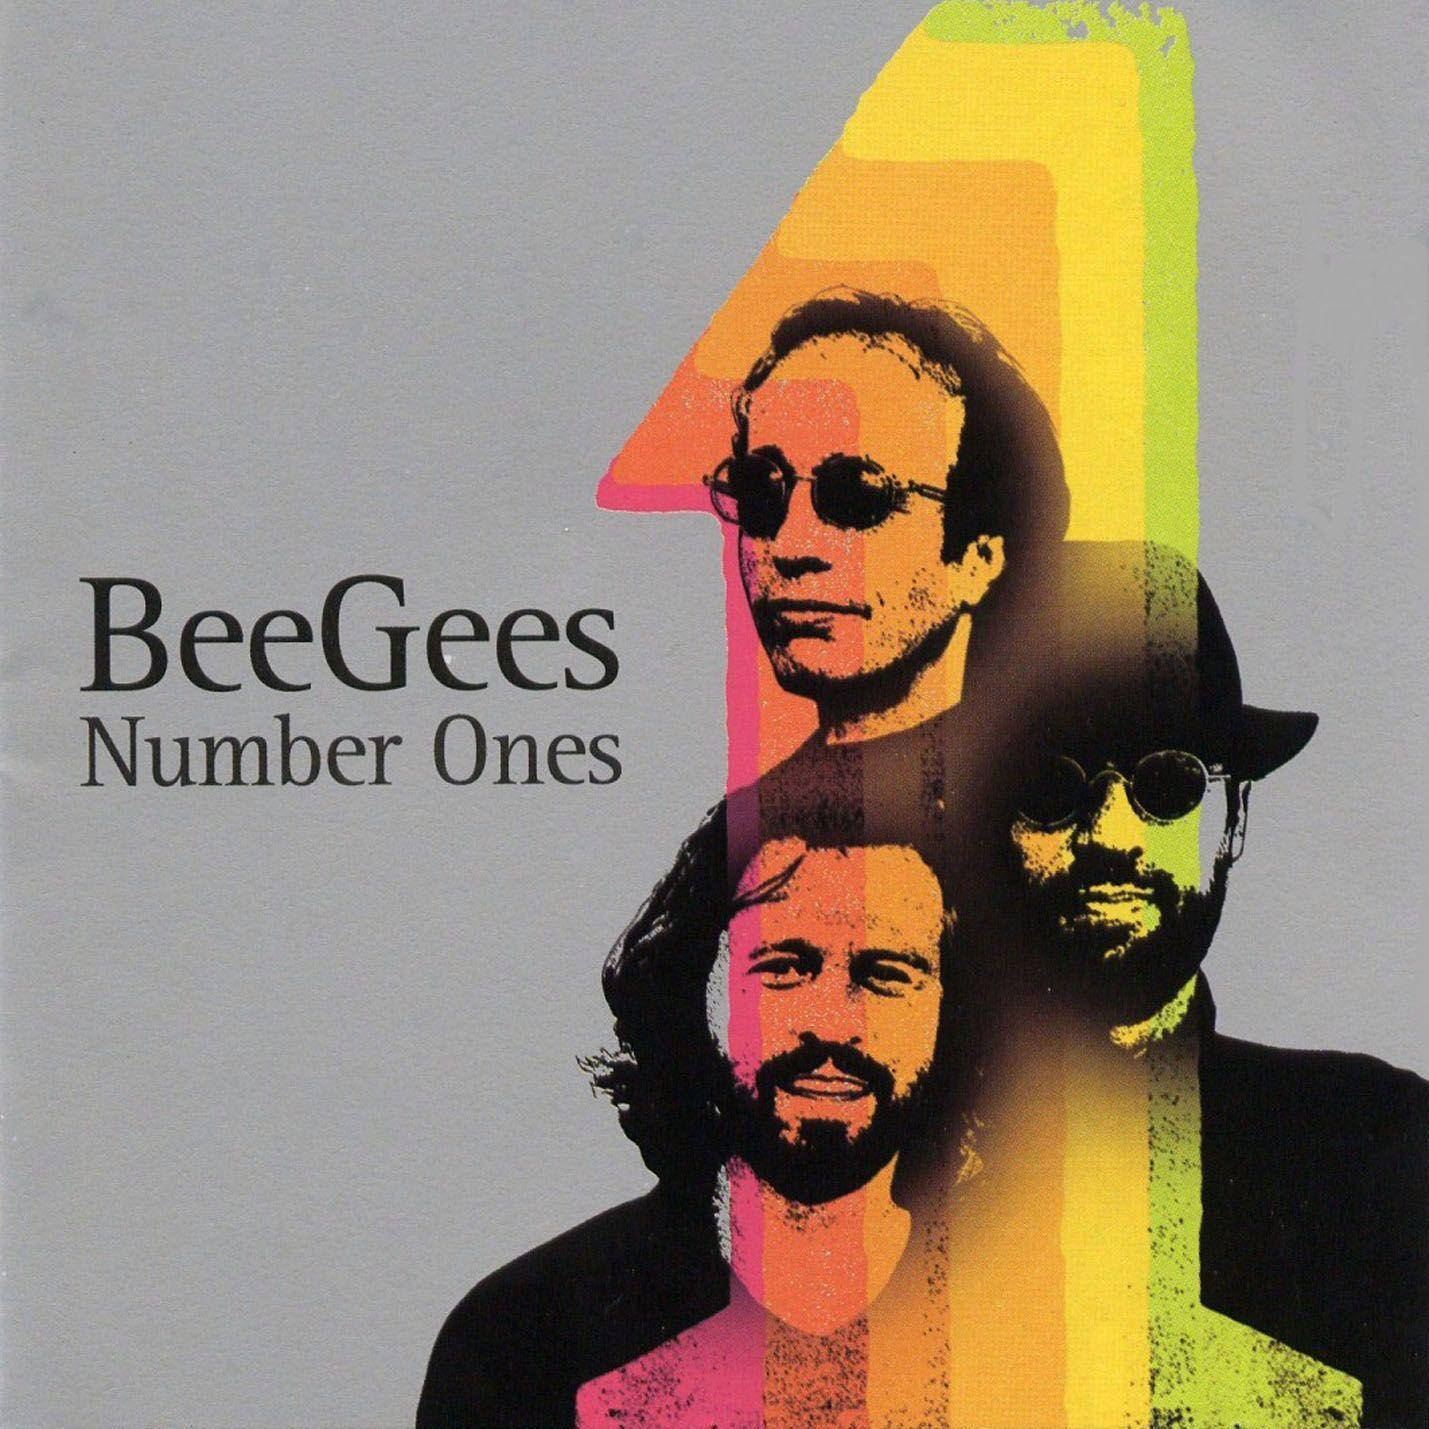 Bee Gees Number Ones Compilation Album Cover Background